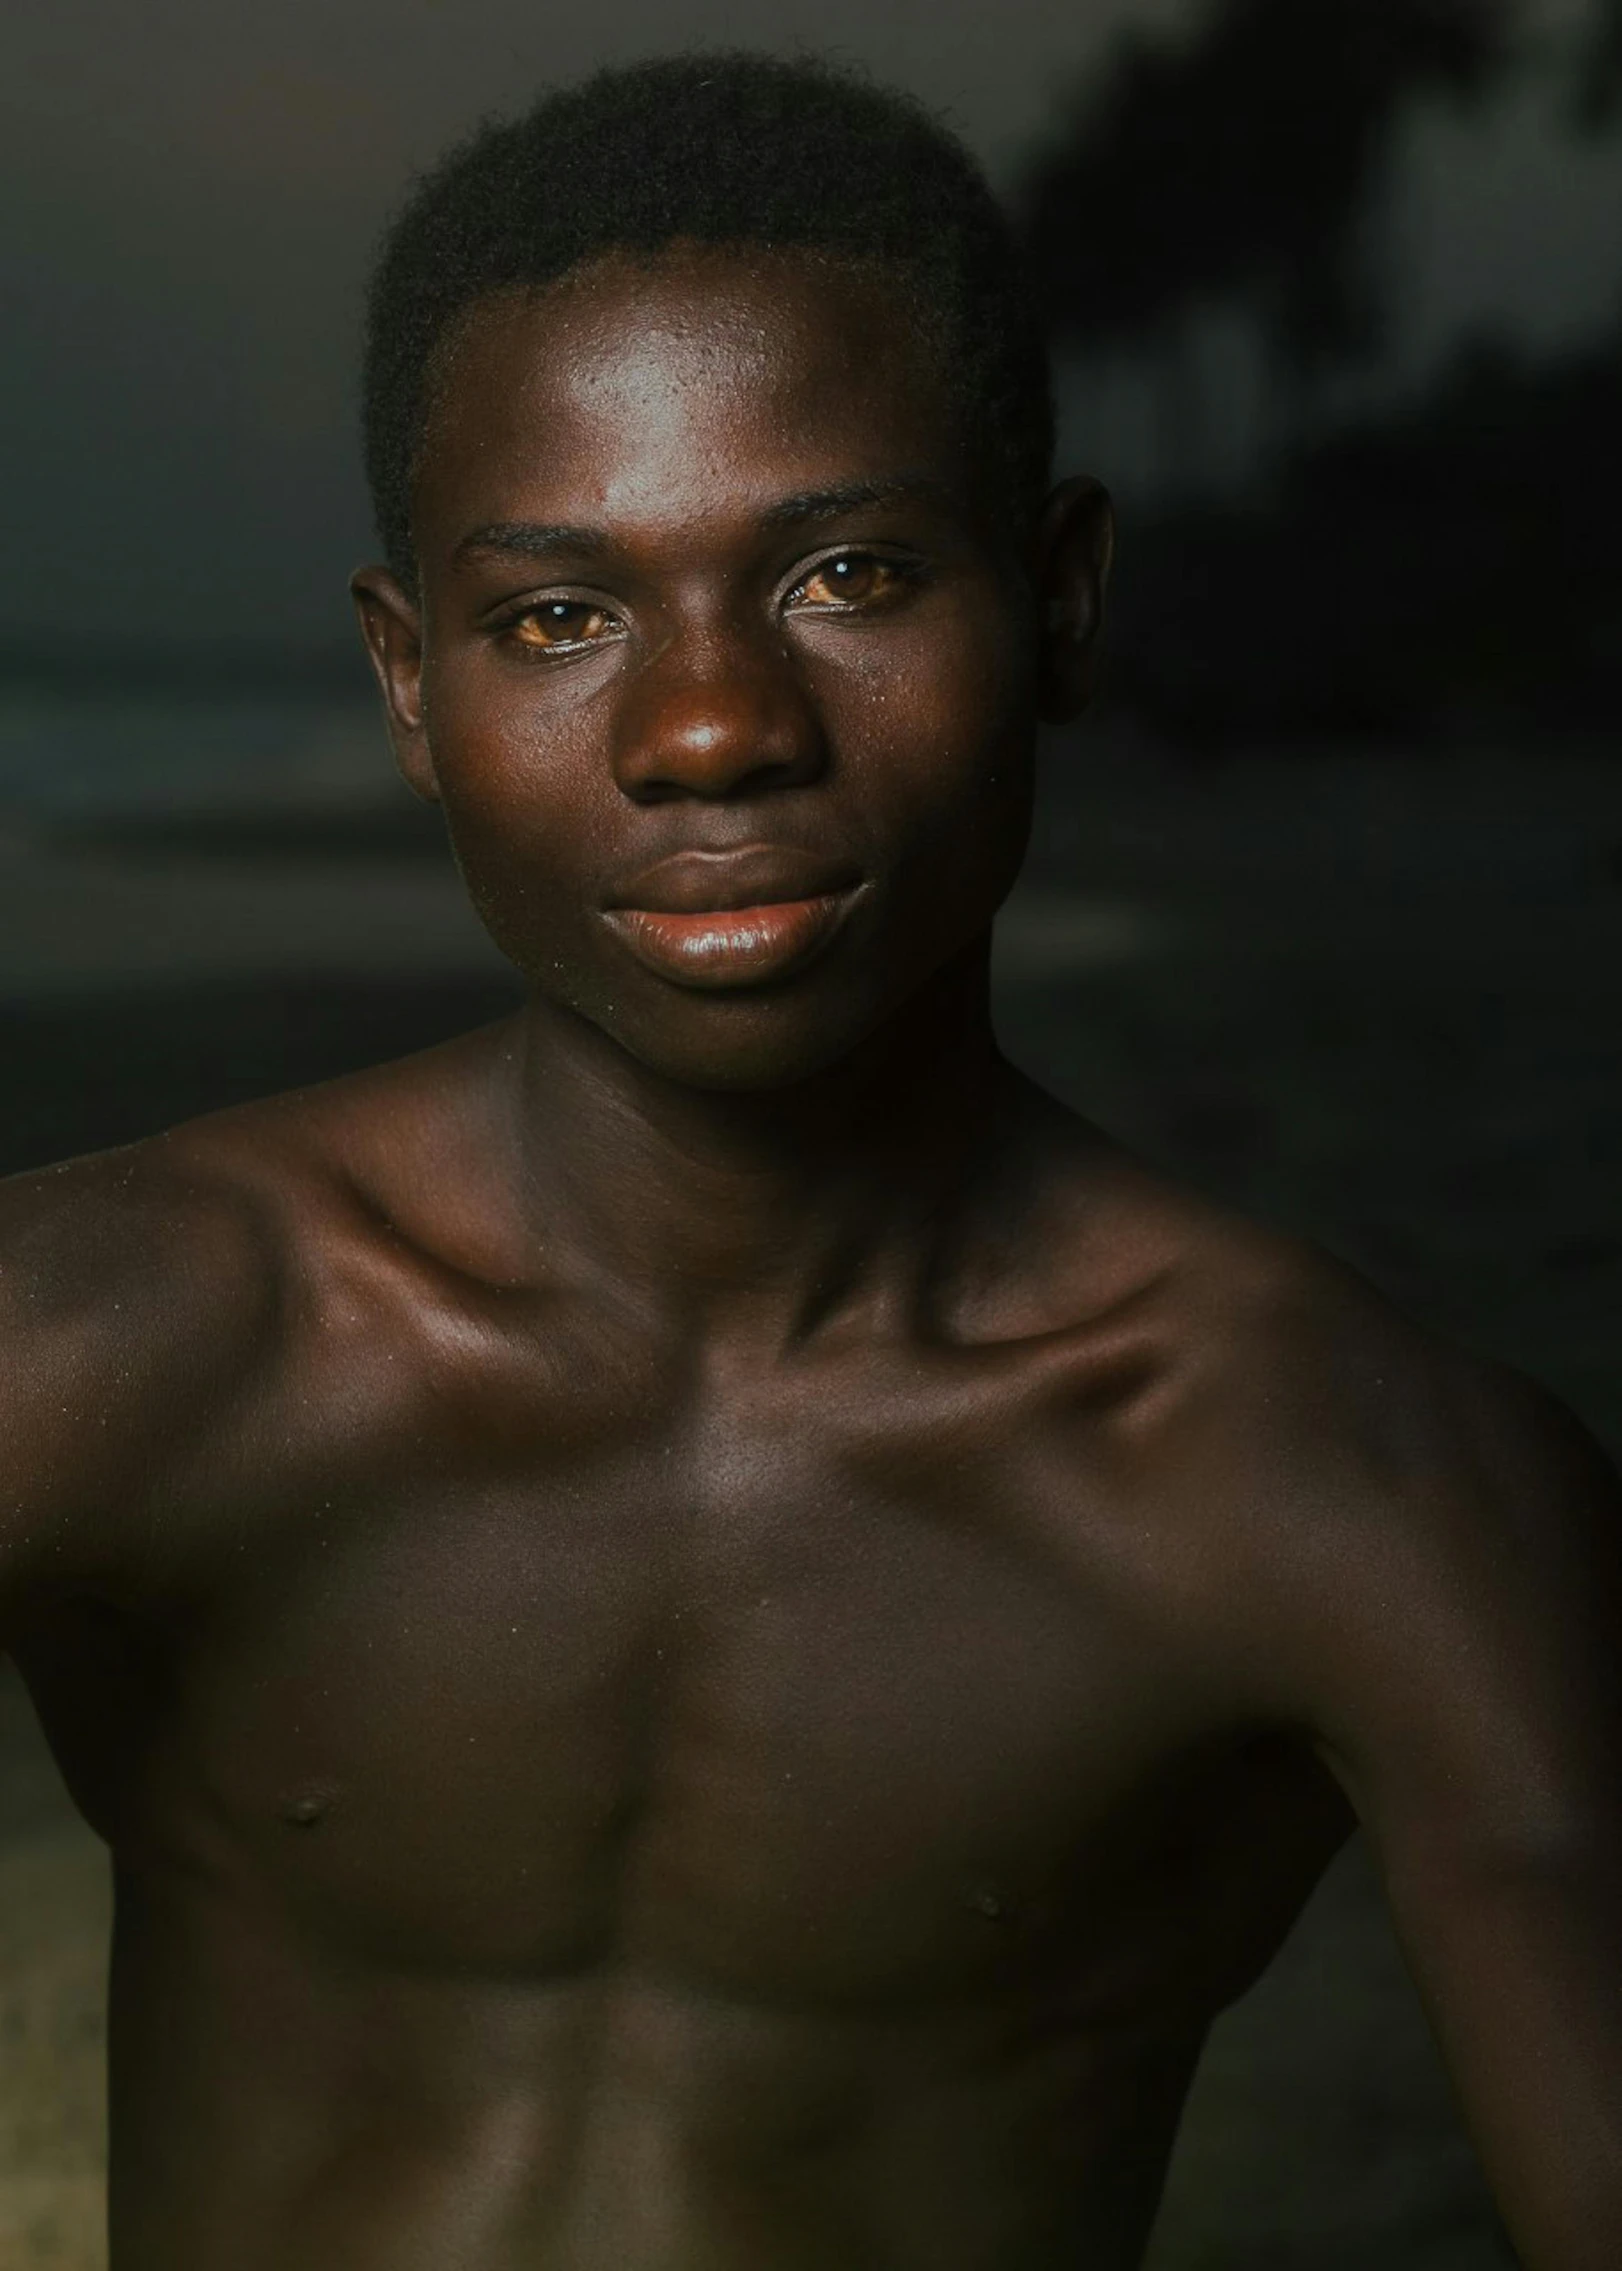 an african man in his dark skin poses with his shirt down